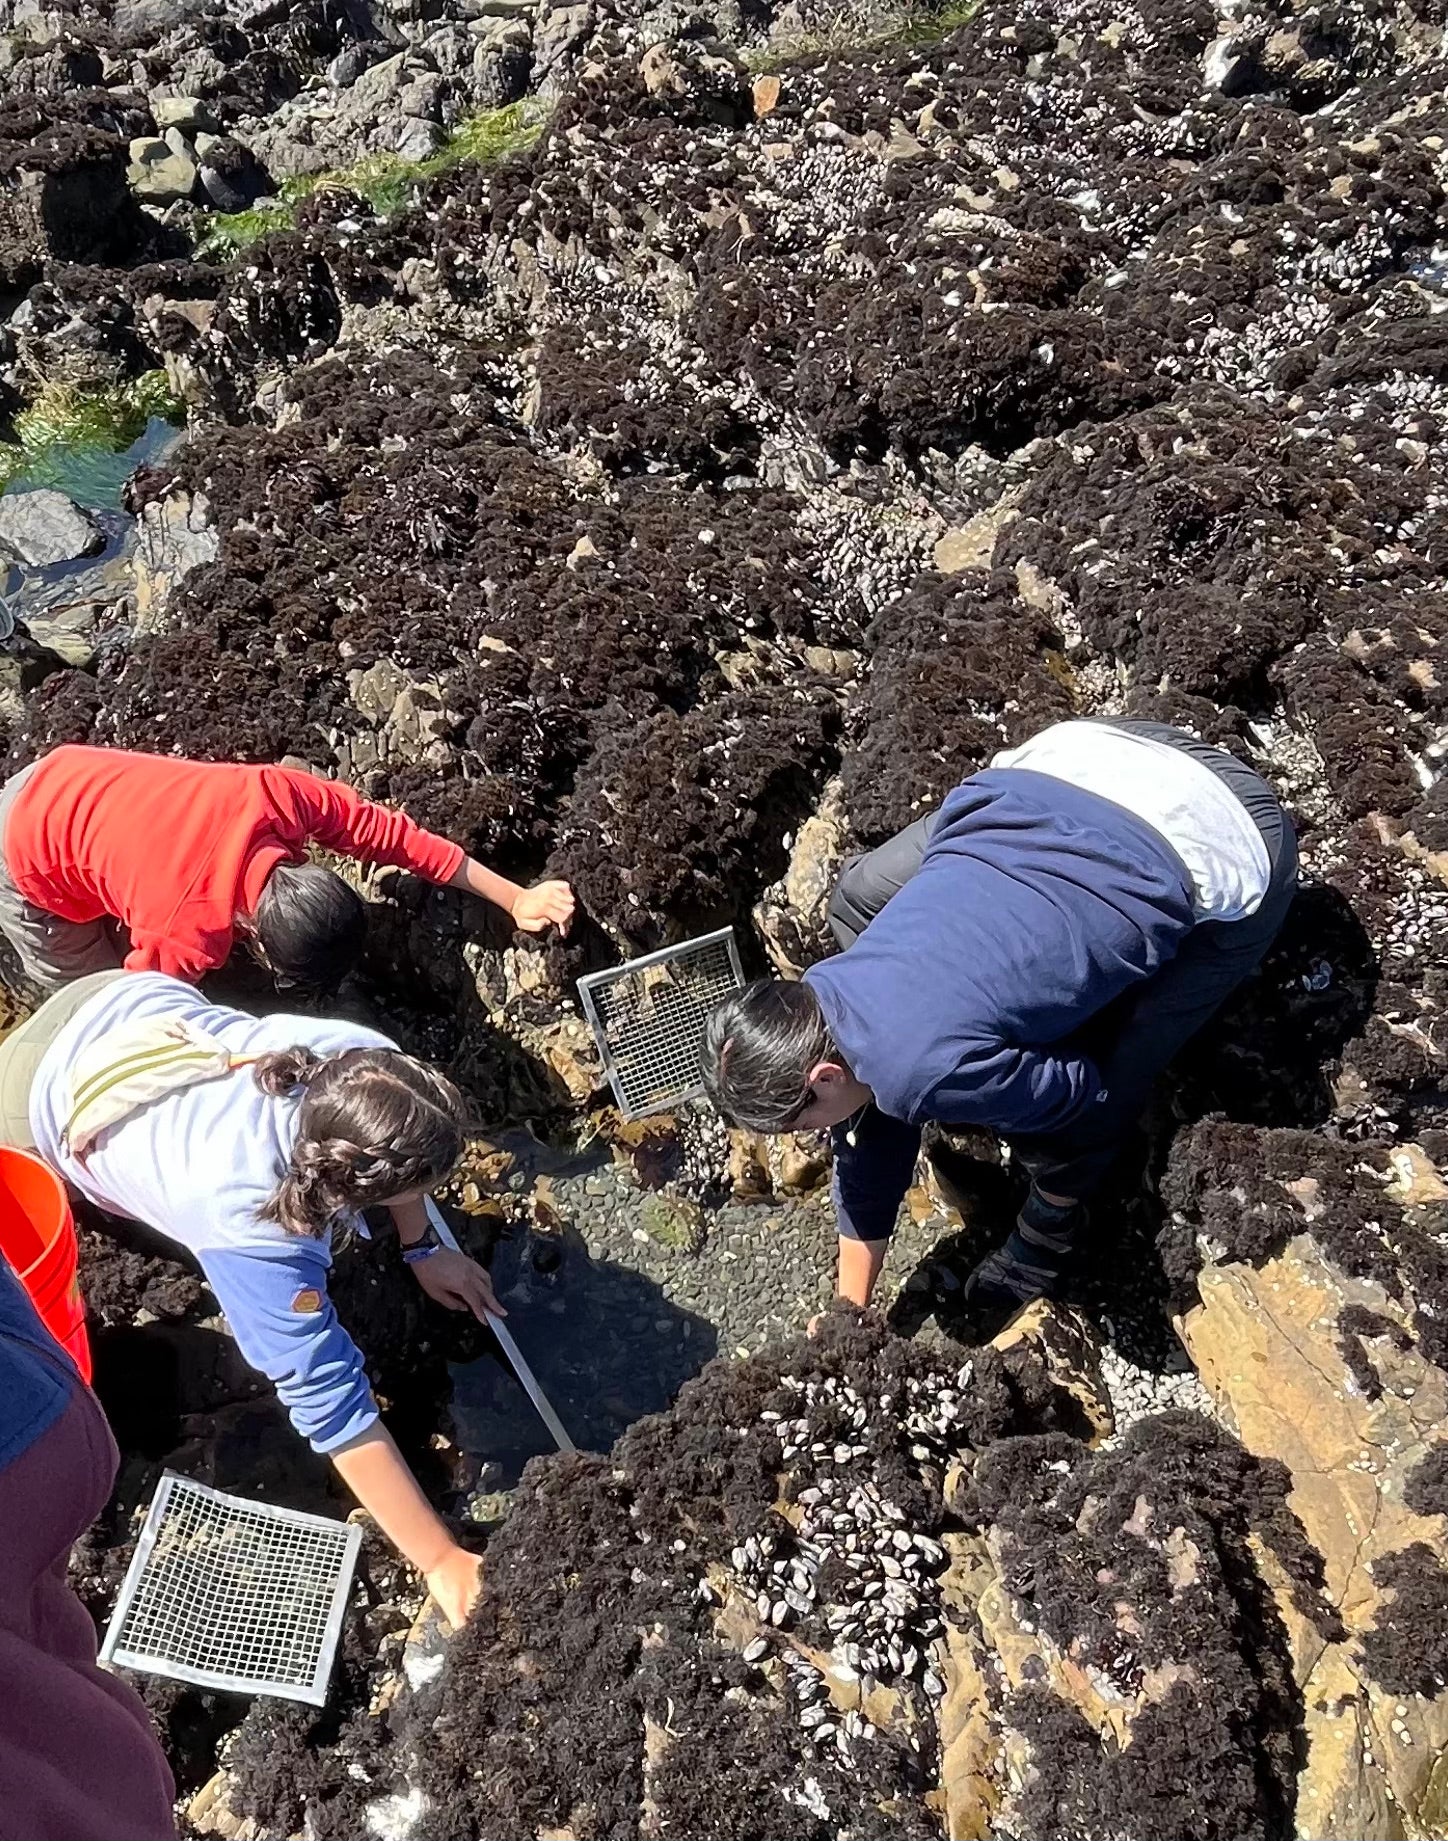 Mia Emerson and classmates collect hermit crabs in tide pools